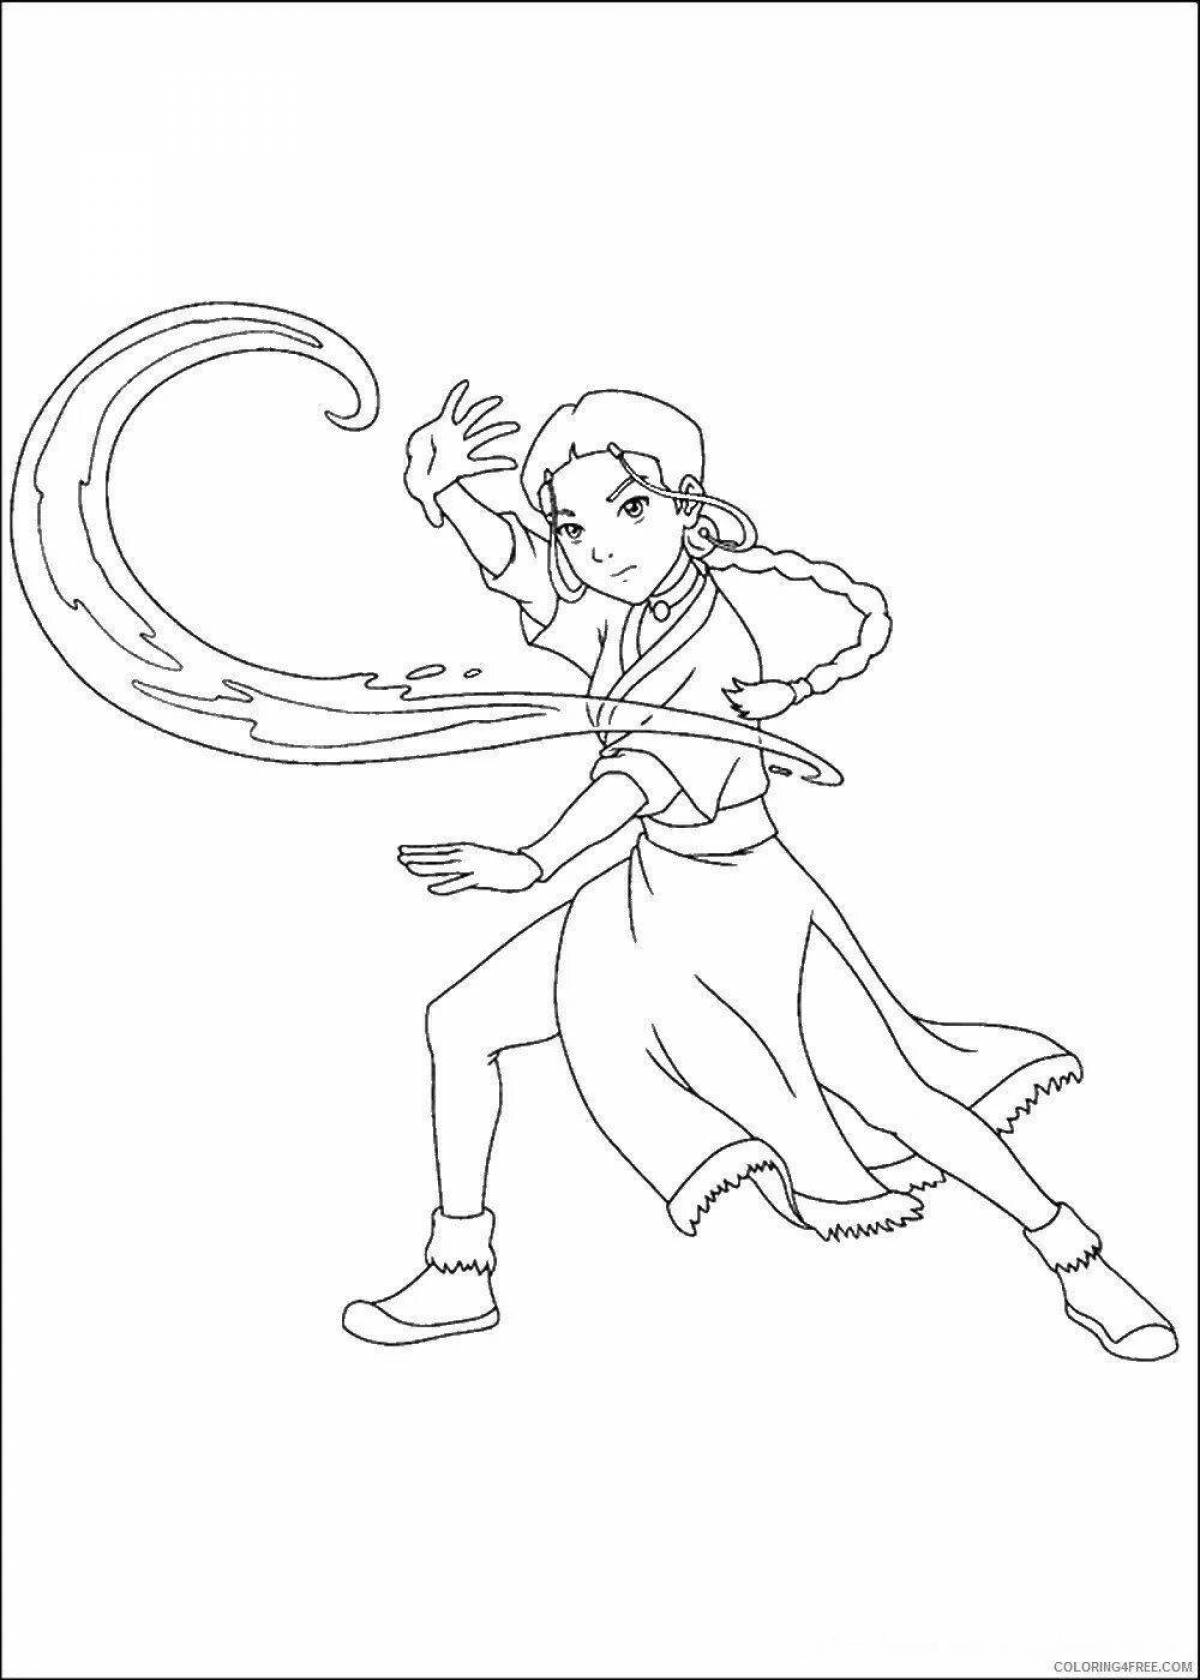 Joyful Avatar Coloring Page The Last Airbender